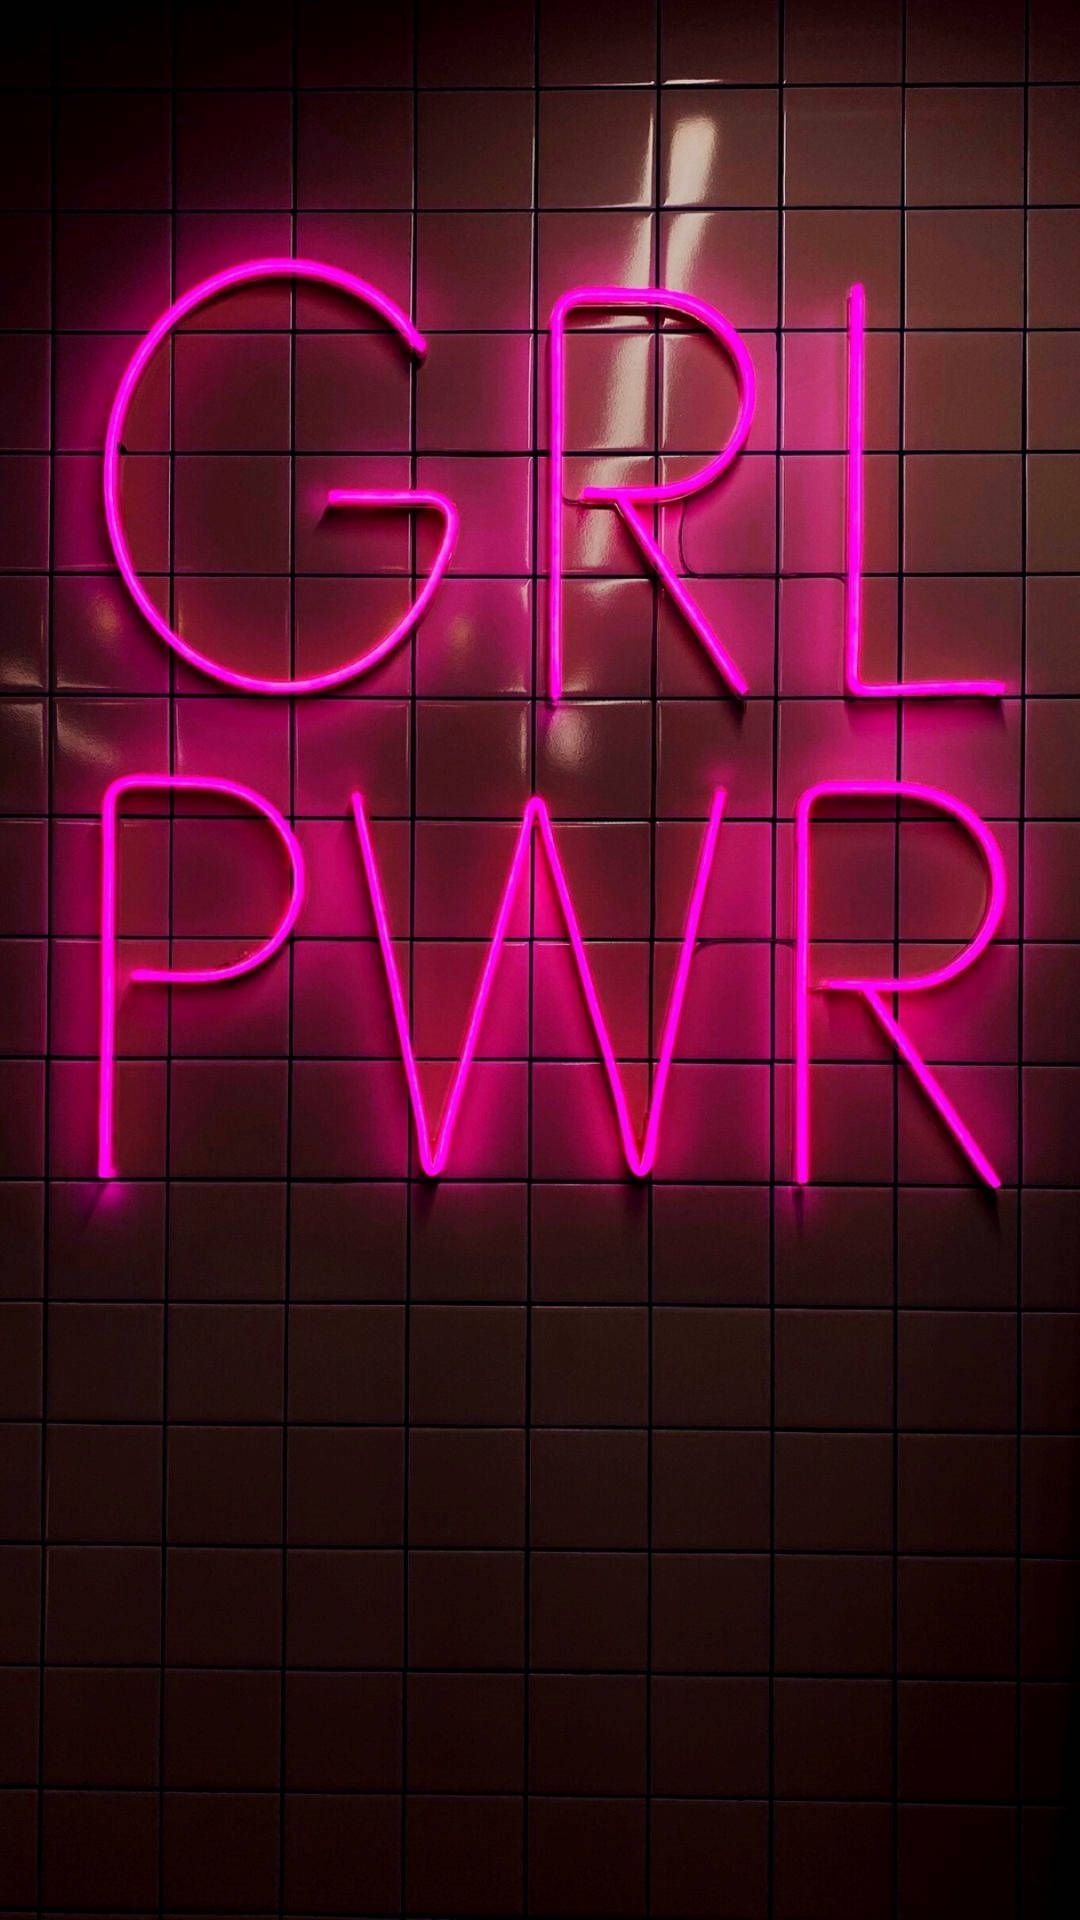 A neon sign that says girl power - Neon pink